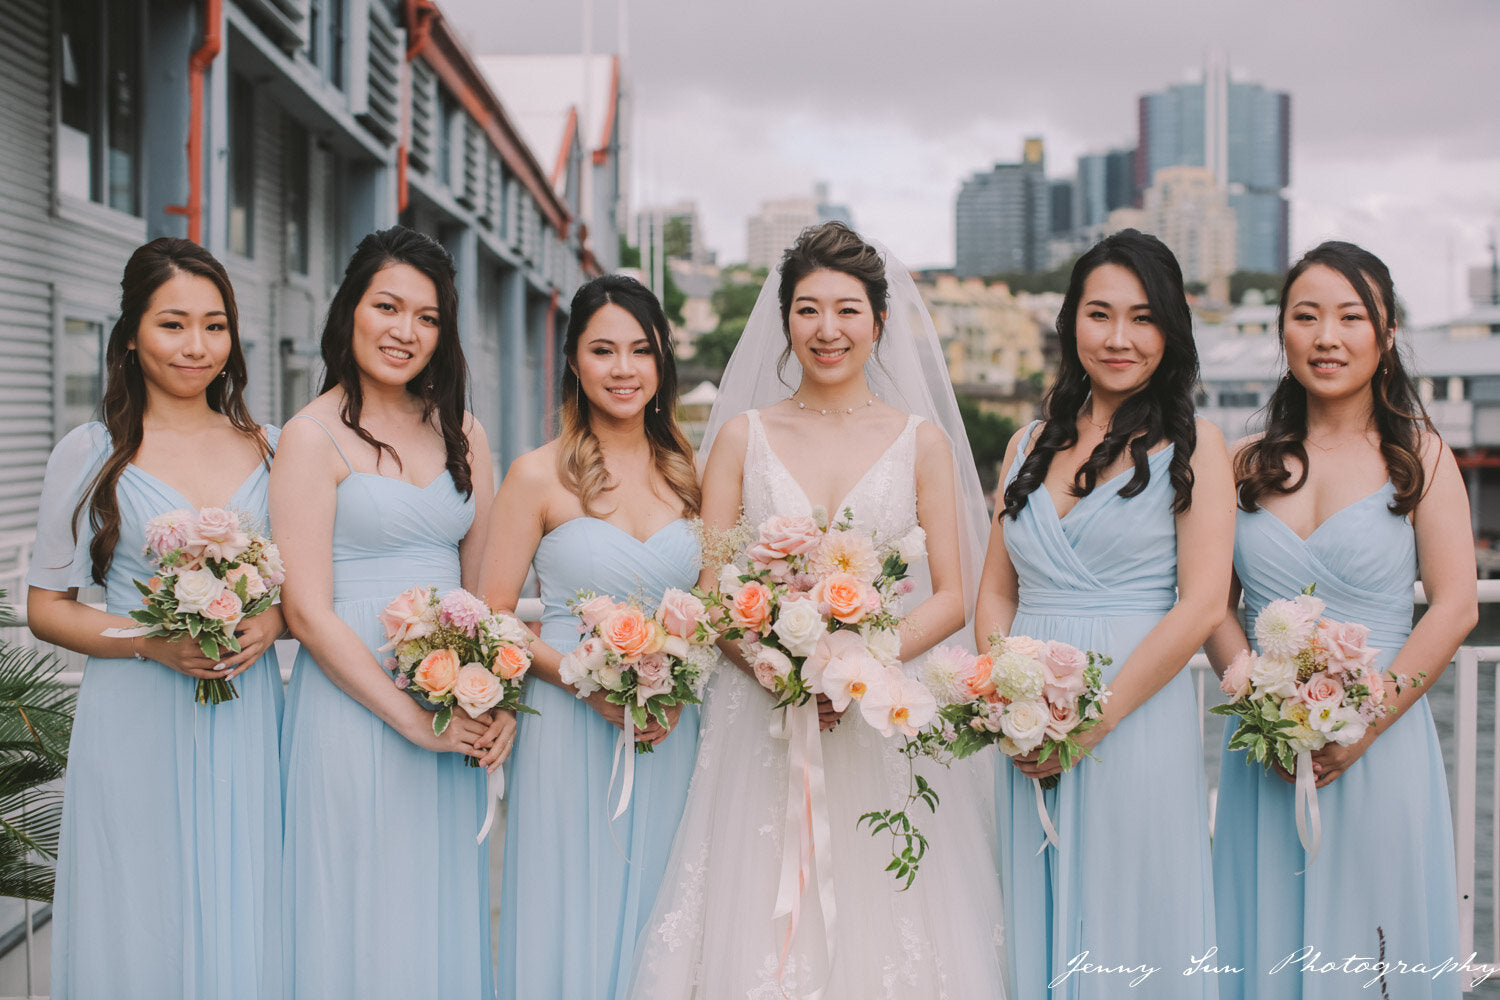 bride with bridesmaids in blue dresses and flowers pier one sydney wedding